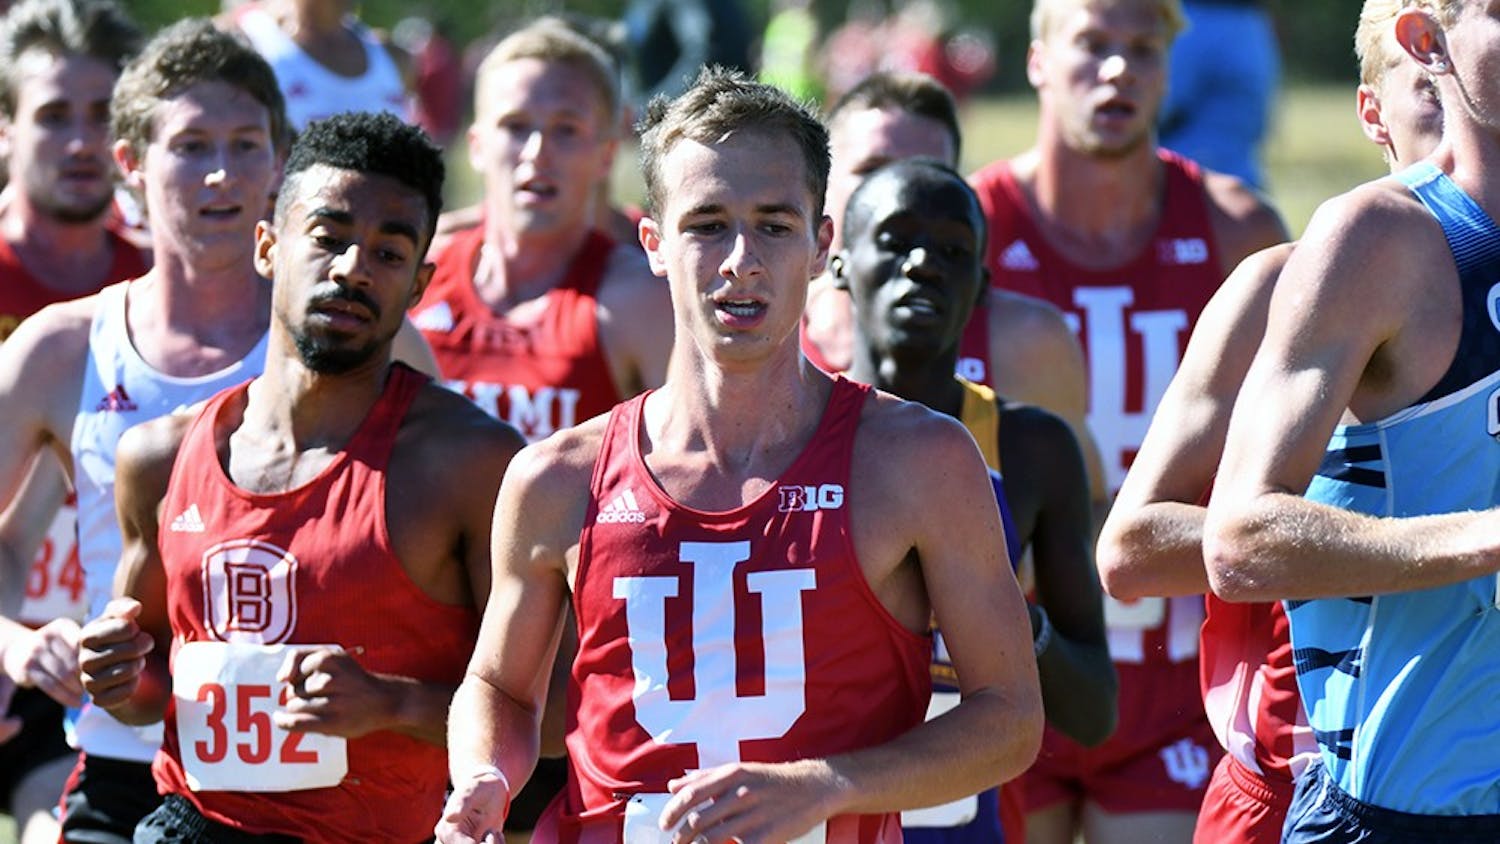 Then-sophomore, now junior Kyle Mau runs in the Sam Bell Invitational on Sept. 30, 2017 at the IU cross-country course. Mau finished 49th in the NCAA National Championship race this season.